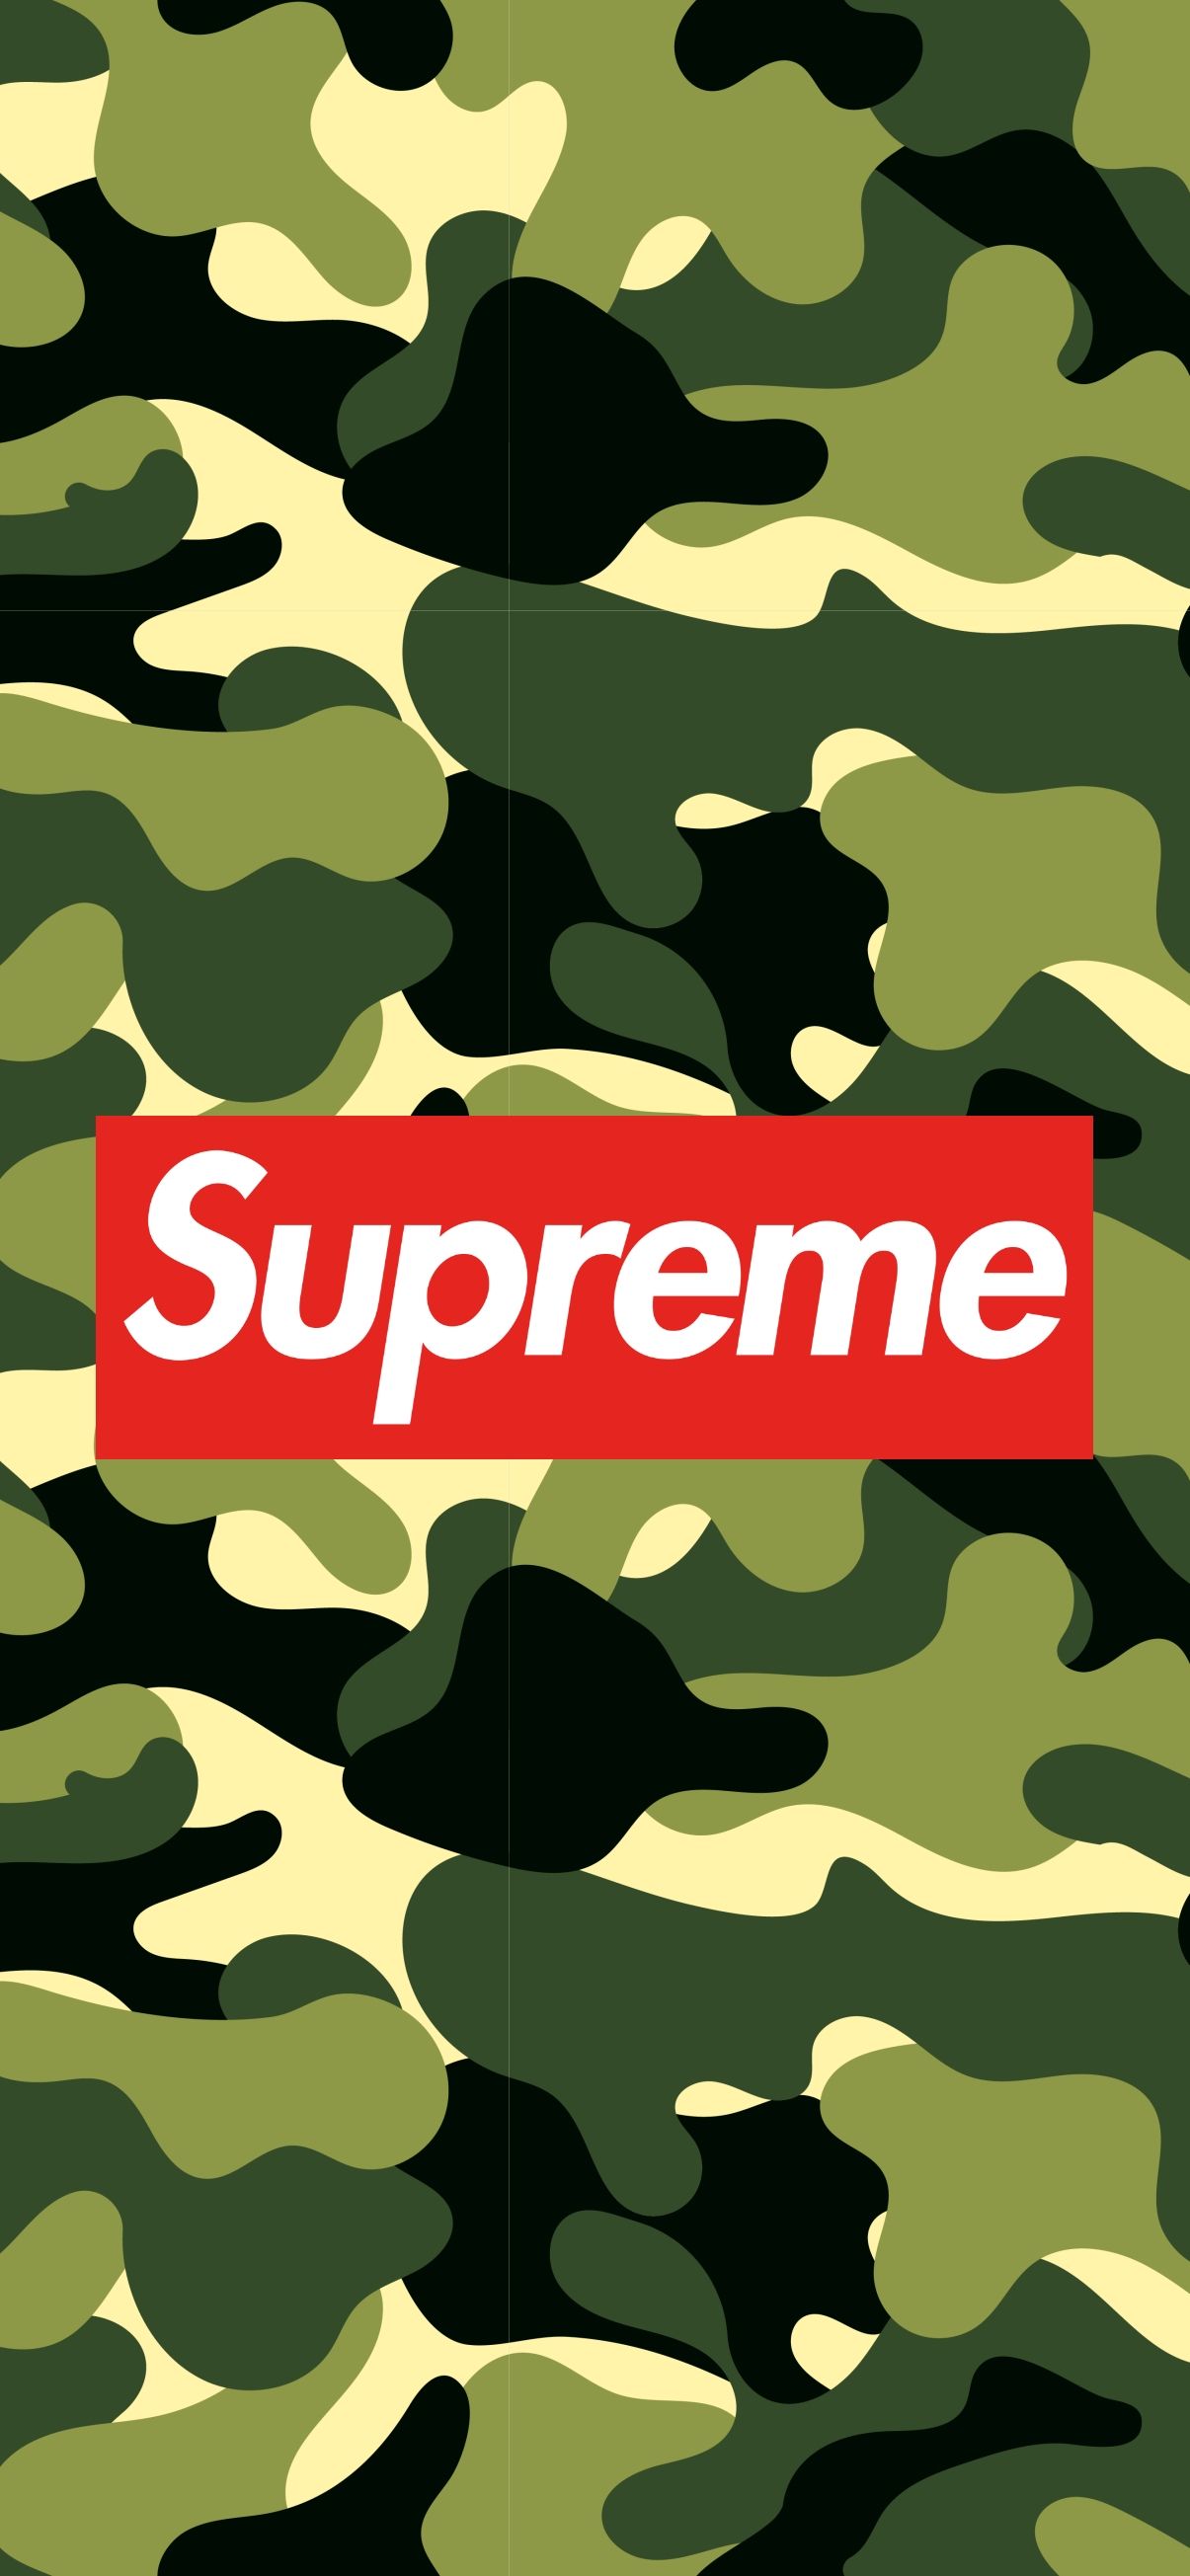 Supreme camouflage iphone wallpaper